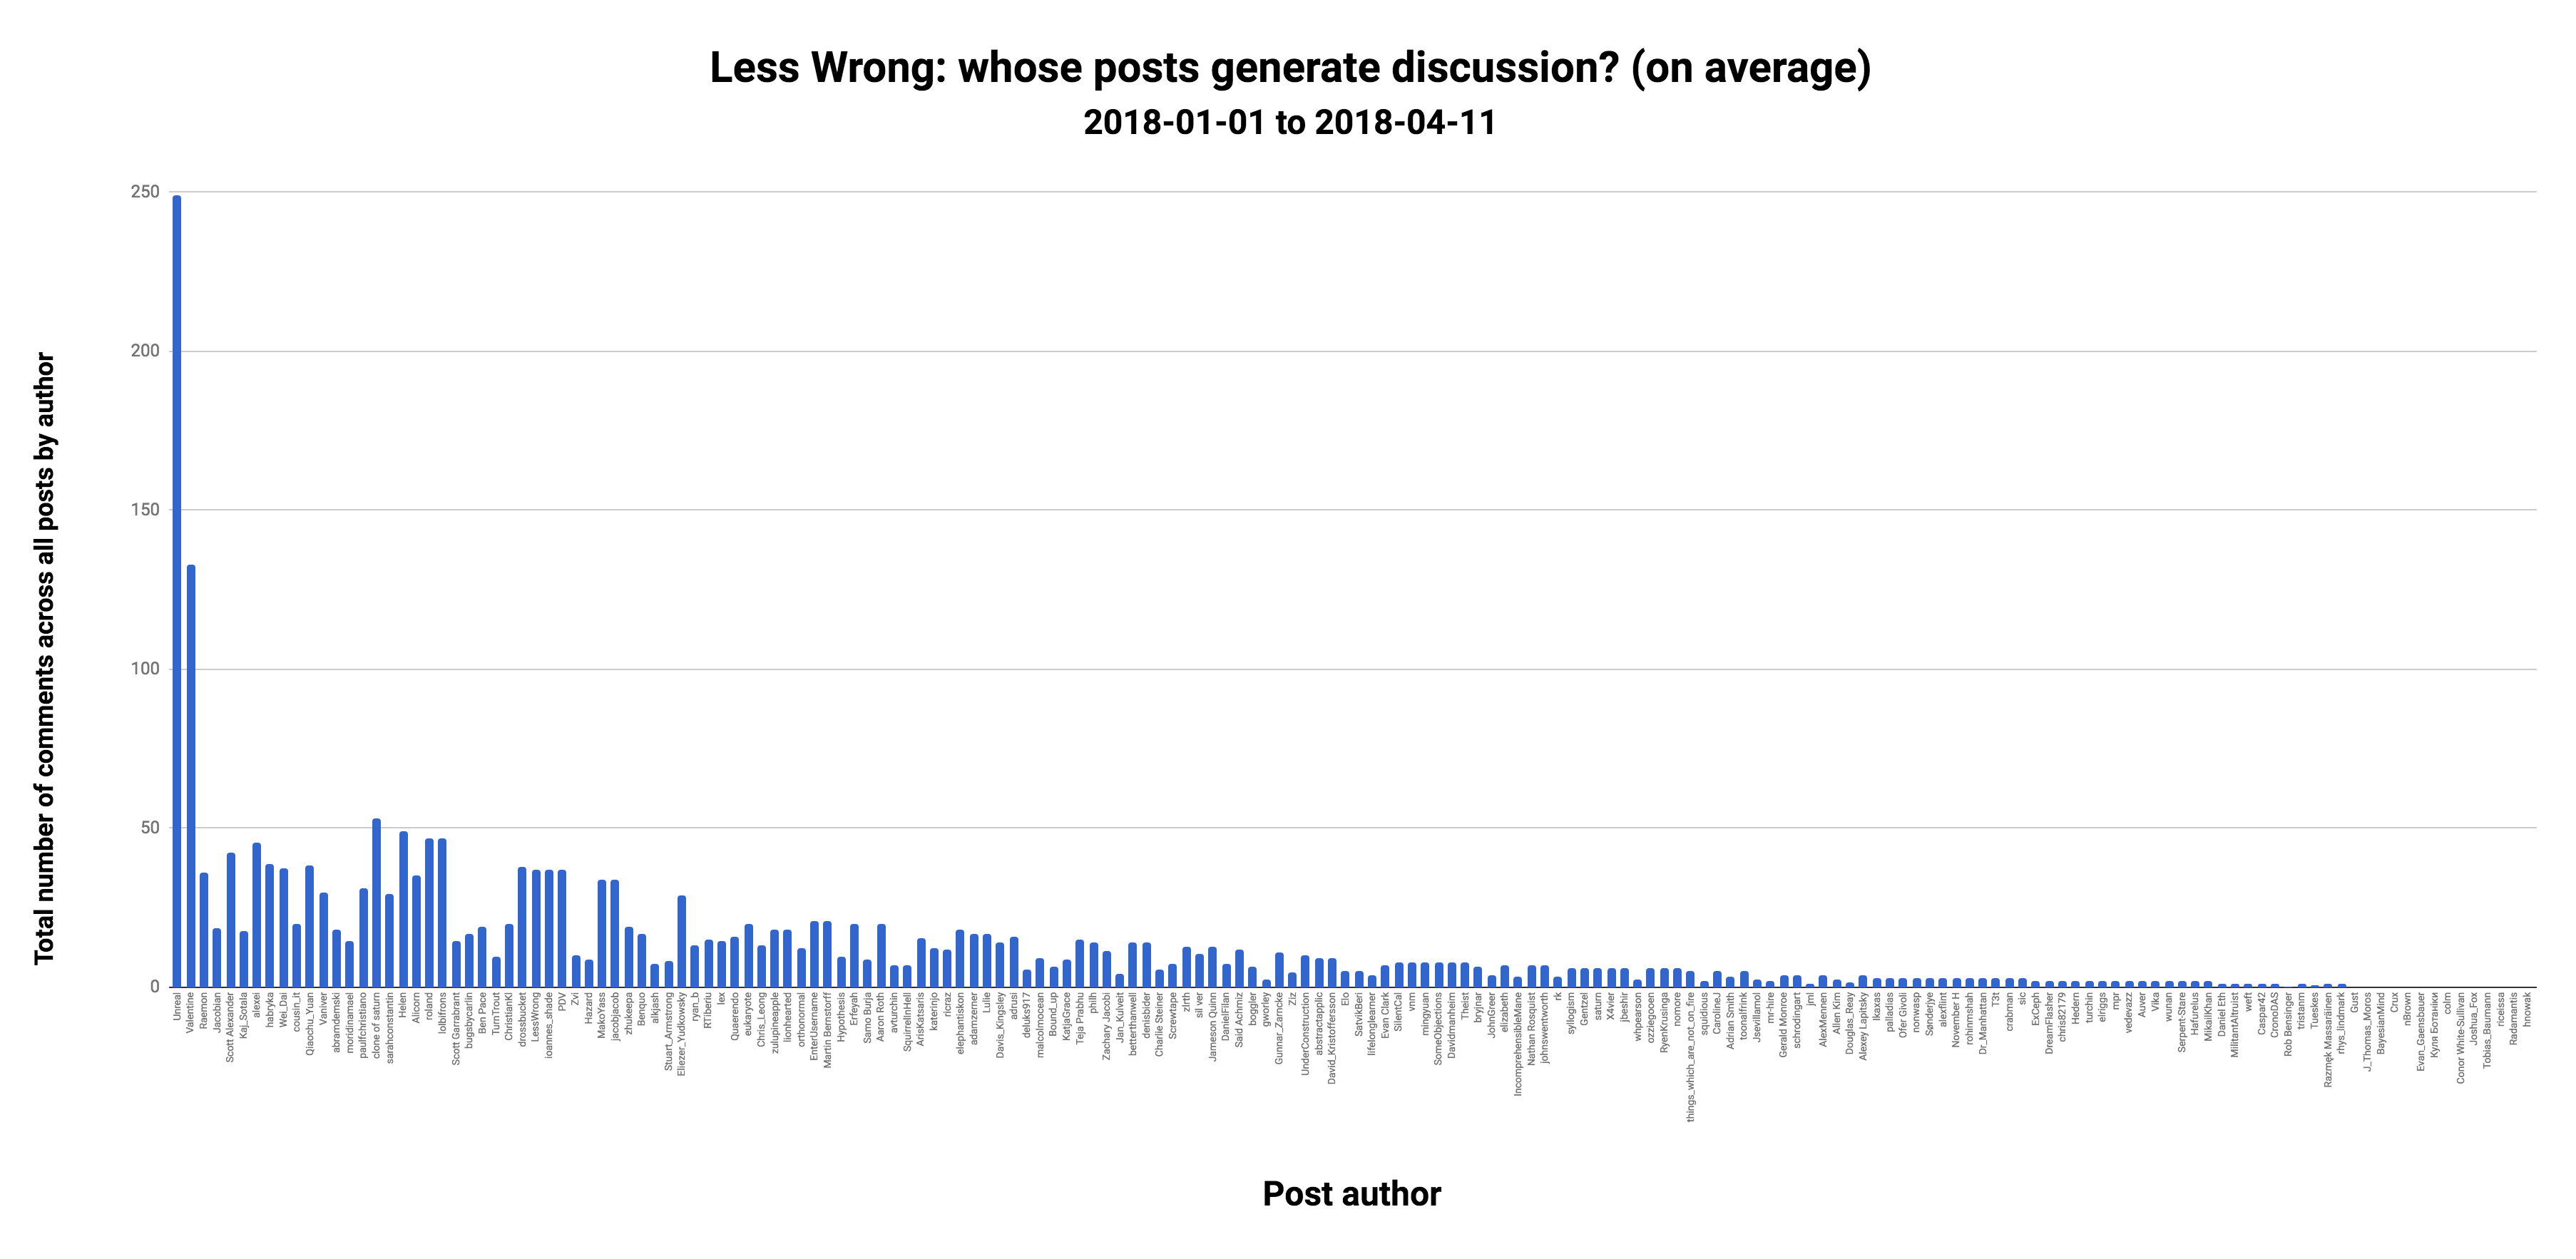 Less Wrong: whose posts generate discussion? (on average)